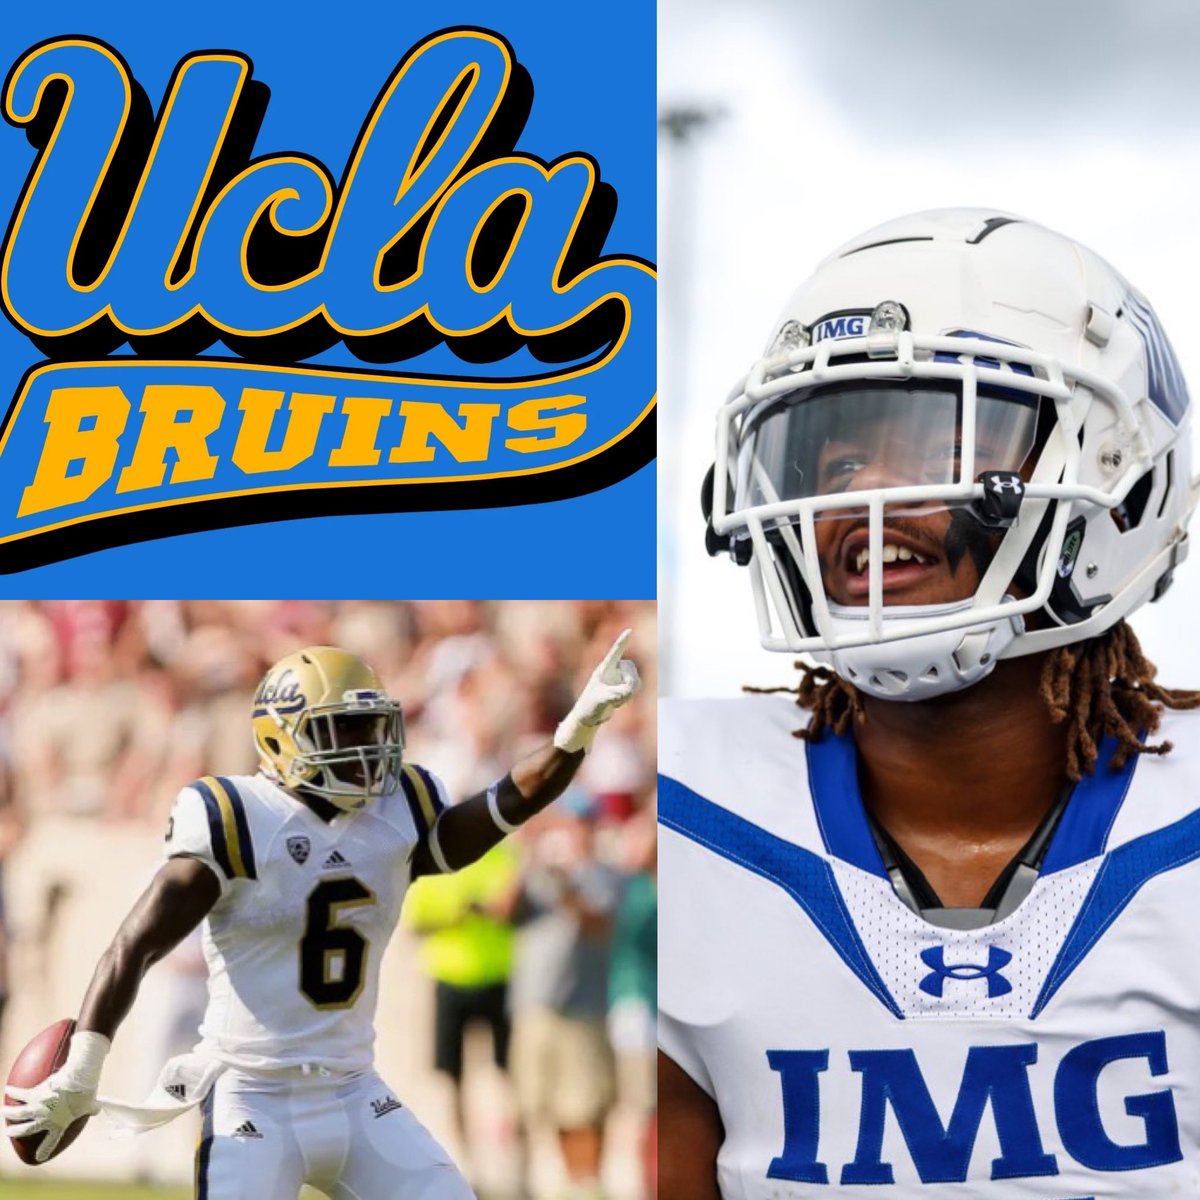 I am extremely blessed and humbled to say that I have received an offer from UCLA @UCLAFootball @brian_ohana5 @KodiWhitfield @LacedfactDreams @adamgorney @TheUCReport @Scott_Schrader @Zack_poff_MP @GregBiggins @CraigHaubert @dzoloty @ChadSimmons_ @CoachKiddIMG